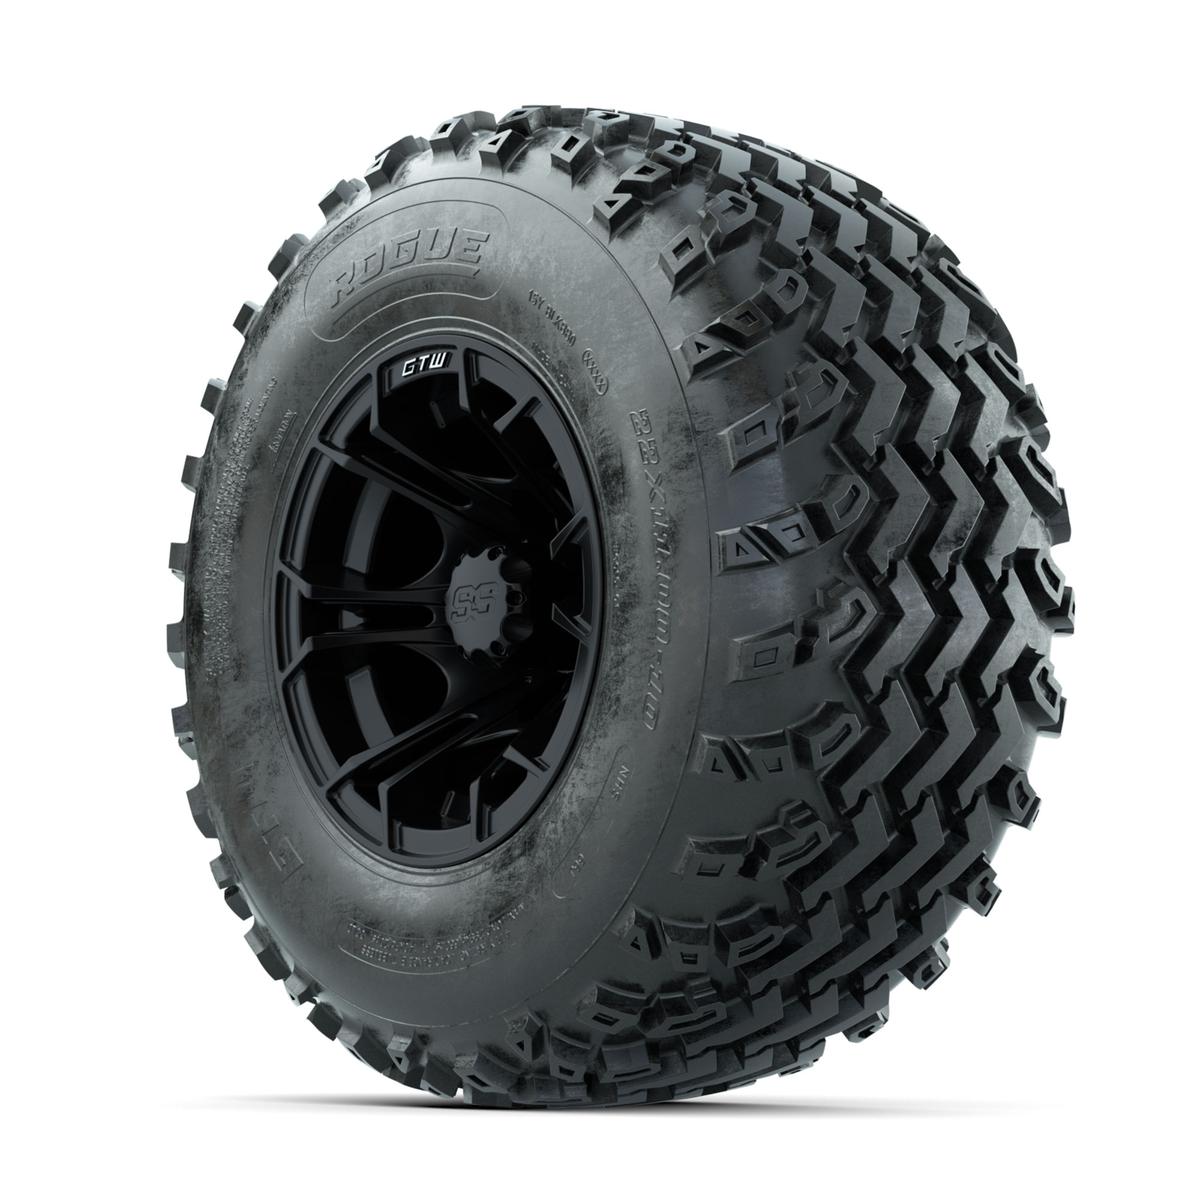 GTW Spyder Matte Black 10 in Wheels with 22x11.00-10 Rogue All Terrain Tires – Full Set